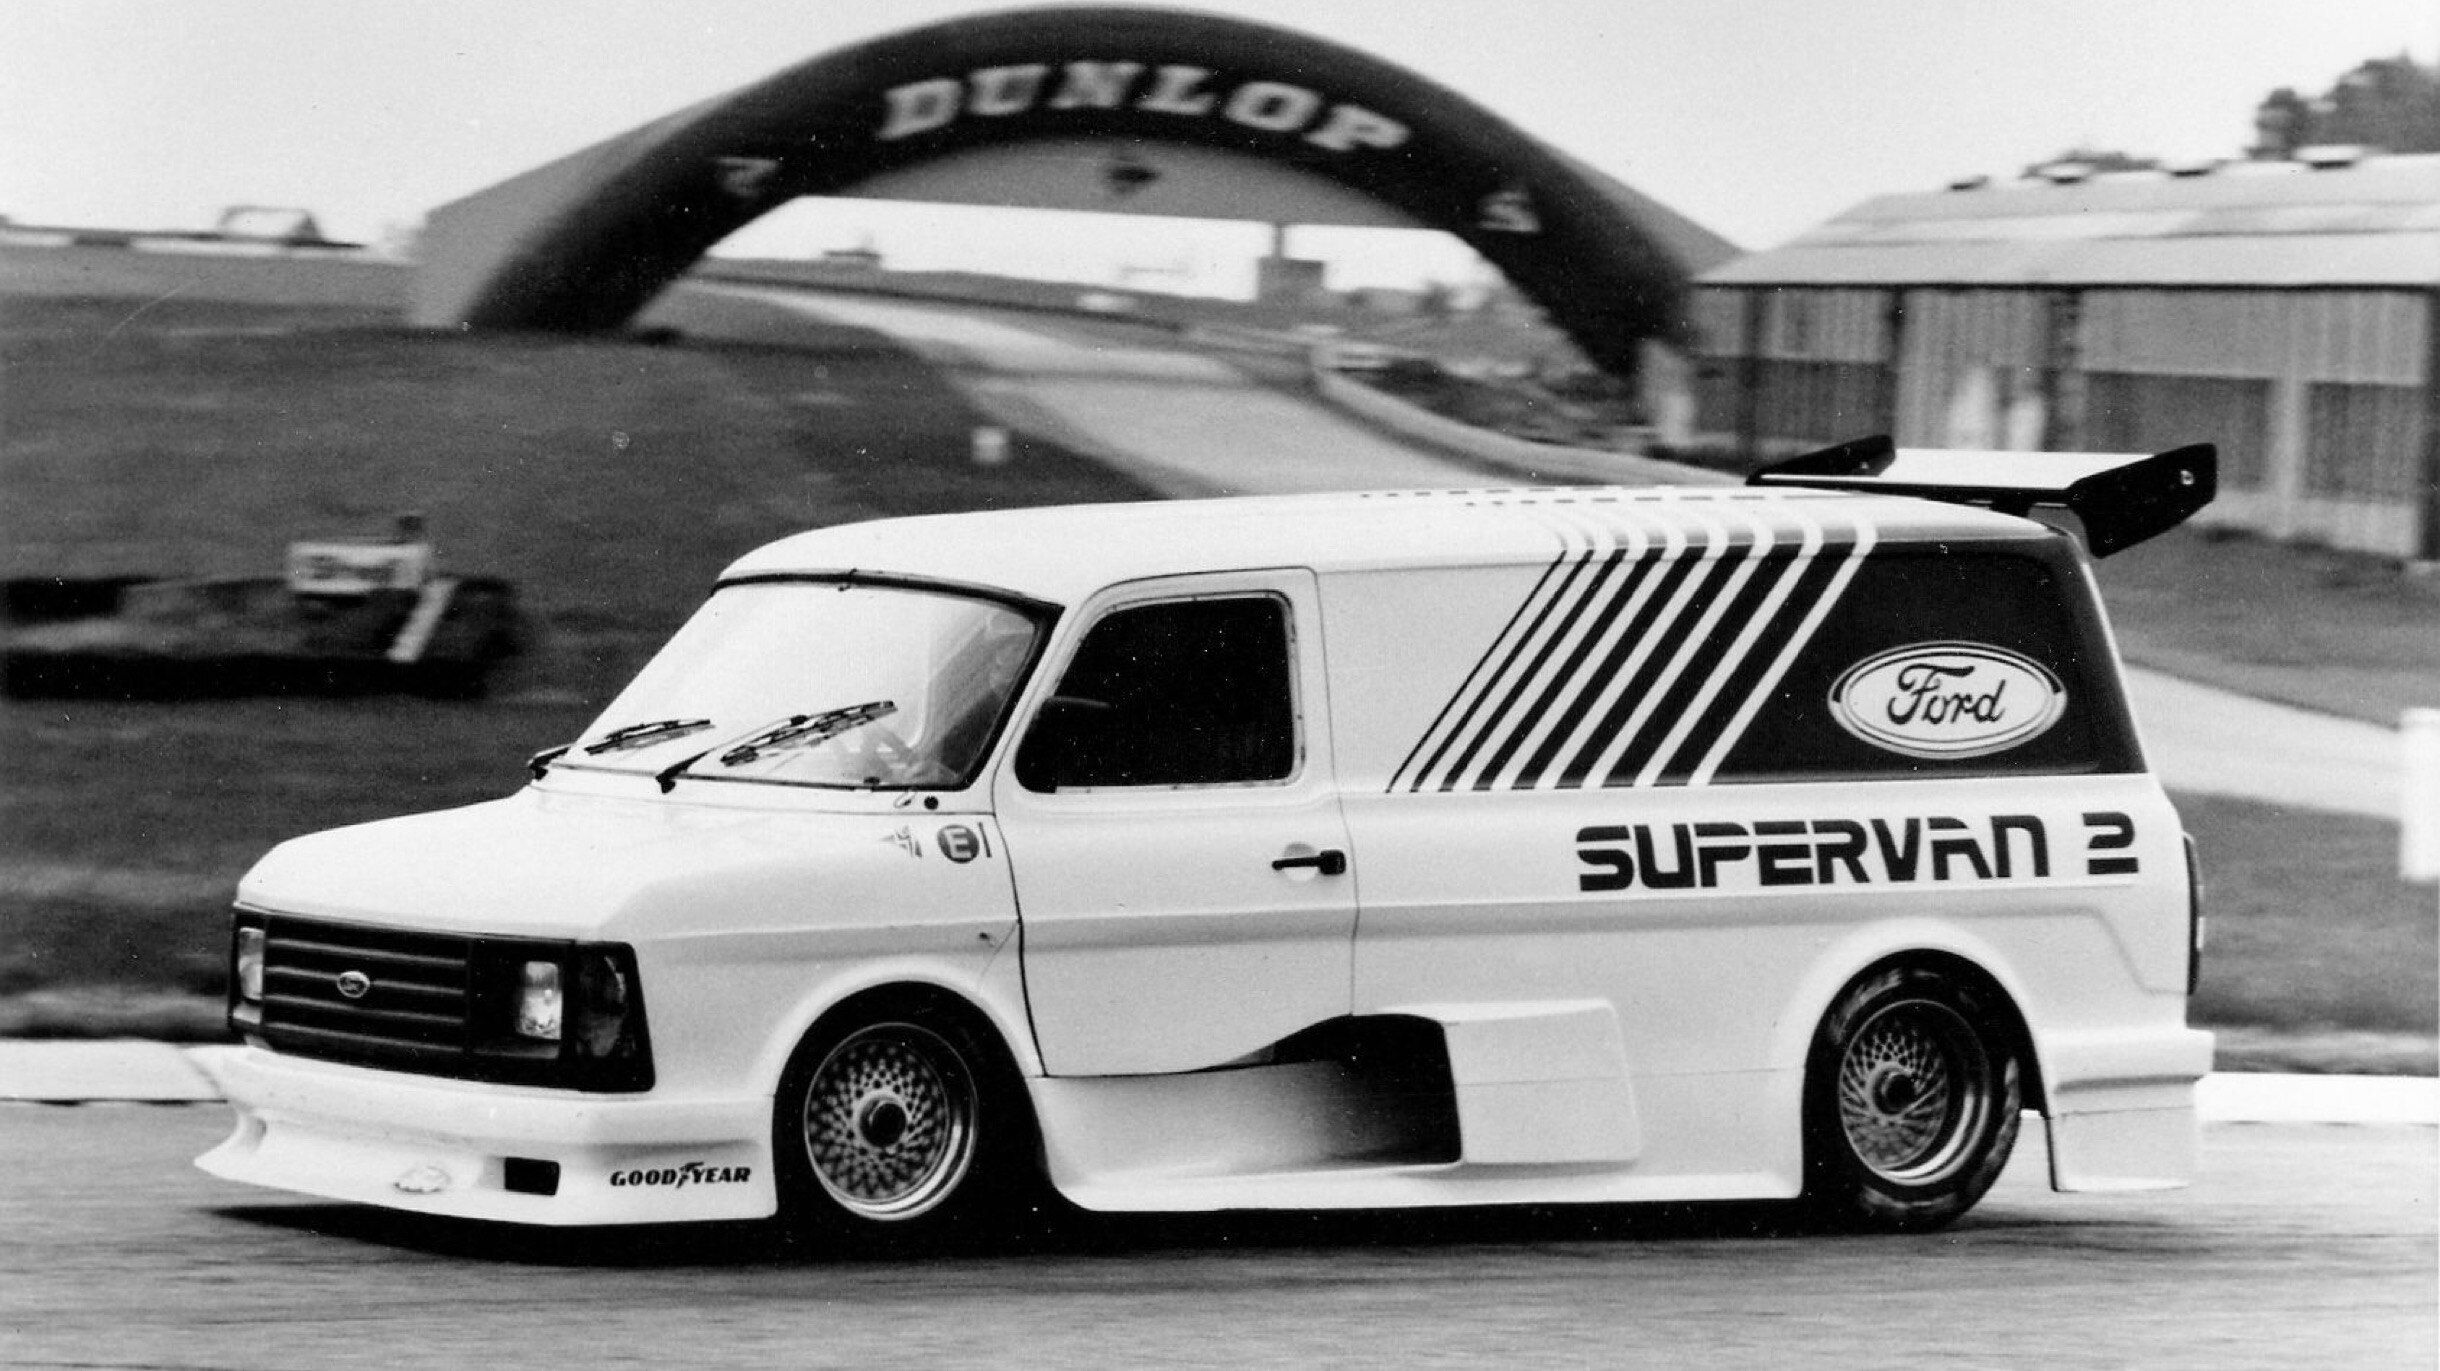 Ford Supervan 2 was used to highlight the Transit's high performance